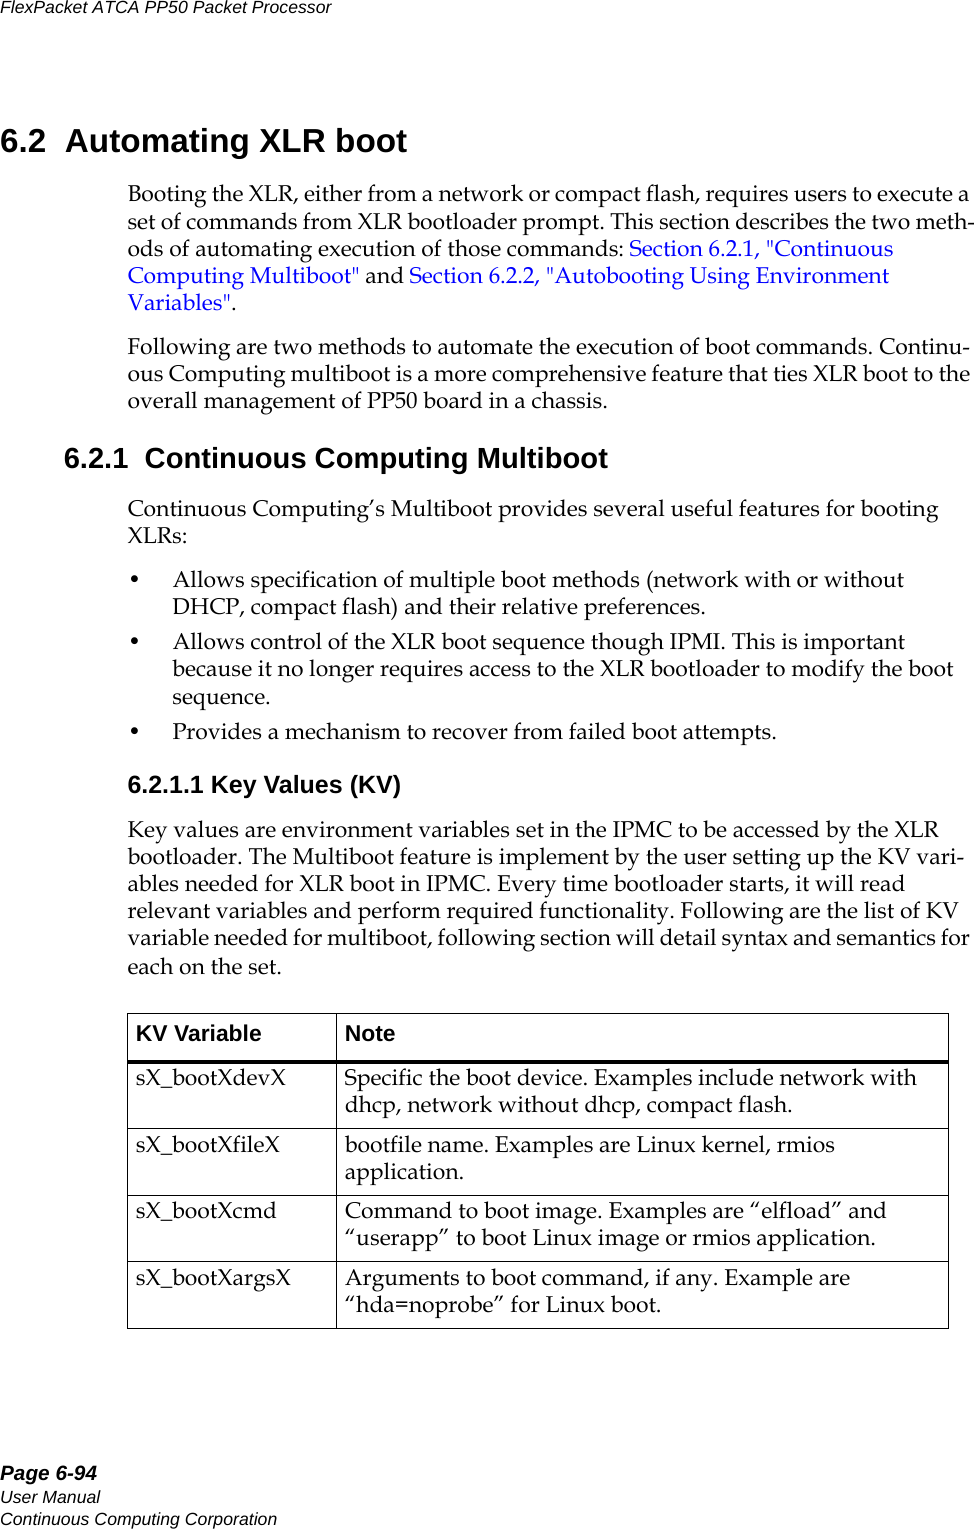 Page 6-94User ManualContinuous Computing CorporationFlexPacket ATCA PP50 Packet Processor     Preliminary6.2  Automating XLR bootBooting the XLR, either from a network or compact flash, requires users to execute a set of commands from XLR bootloader prompt. This section describes the two meth-ods of automating execution of those commands: Section6.2.1, &quot;Continuous Computing Multiboot&quot; and Section6.2.2, &quot;Autobooting Using Environment Variables&quot;. Following are two methods to automate the execution of boot commands. Continu-ous Computing multiboot is a more comprehensive feature that ties XLR boot to the overall management of PP50 board in a chassis.6.2.1  Continuous Computing MultibootContinuous Computing’s Multiboot provides several useful features for booting XLRs:• Allows specification of multiple boot methods (network with or without DHCP, compact flash) and their relative preferences.• Allows control of the XLR boot sequence though IPMI. This is important because it no longer requires access to the XLR bootloader to modify the boot sequence.• Provides a mechanism to recover from failed boot attempts.6.2.1.1 Key Values (KV) Key values are environment variables set in the IPMC to be accessed by the XLR bootloader. The Multiboot feature is implement by the user setting up the KV vari-ables needed for XLR boot in IPMC. Every time bootloader starts, it will read relevant variables and perform required functionality. Following are the list of KV variable needed for multiboot, following section will detail syntax and semantics for each on the set.KV Variable  NotesX_bootXdevX Specific the boot device. Examples include network with dhcp, network without dhcp, compact flash.sX_bootXfileX bootfile name. Examples are Linux kernel, rmios application.sX_bootXcmd Command to boot image. Examples are “elfload” and “userapp” to boot Linux image or rmios application.sX_bootXargsX Arguments to boot command, if any. Example are “hda=noprobe” for Linux boot.